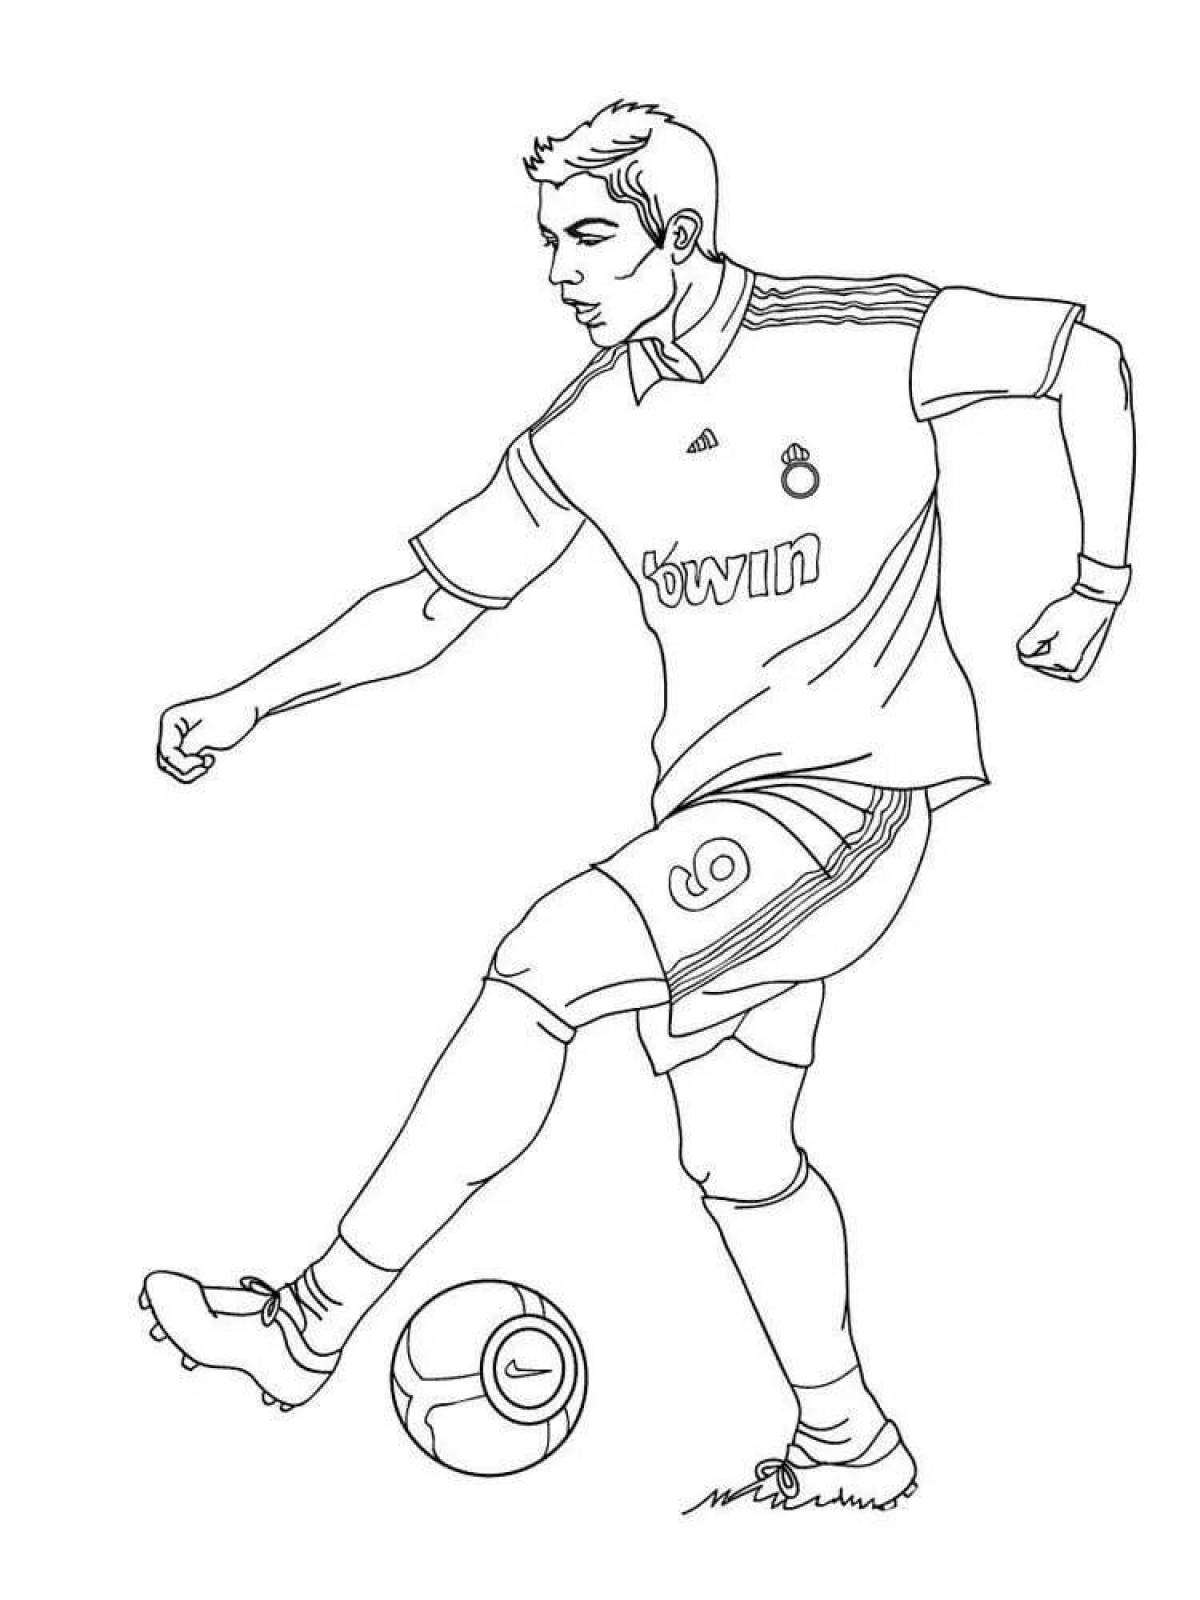 Live football coloring book